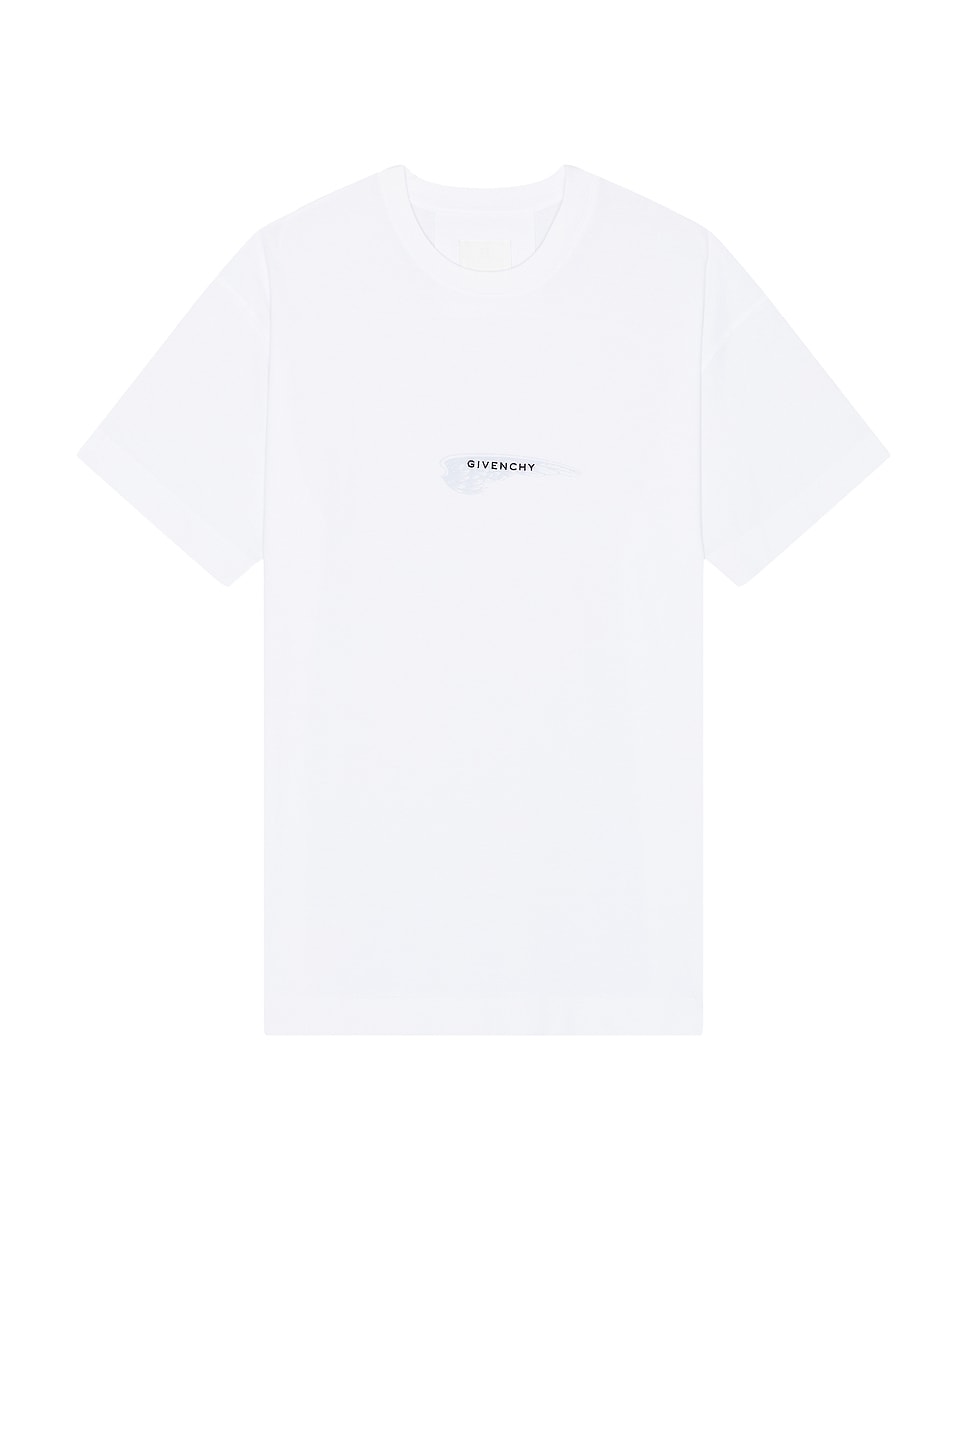 Image 1 of Givenchy Standard Short Sleeve Base T-shirt in White